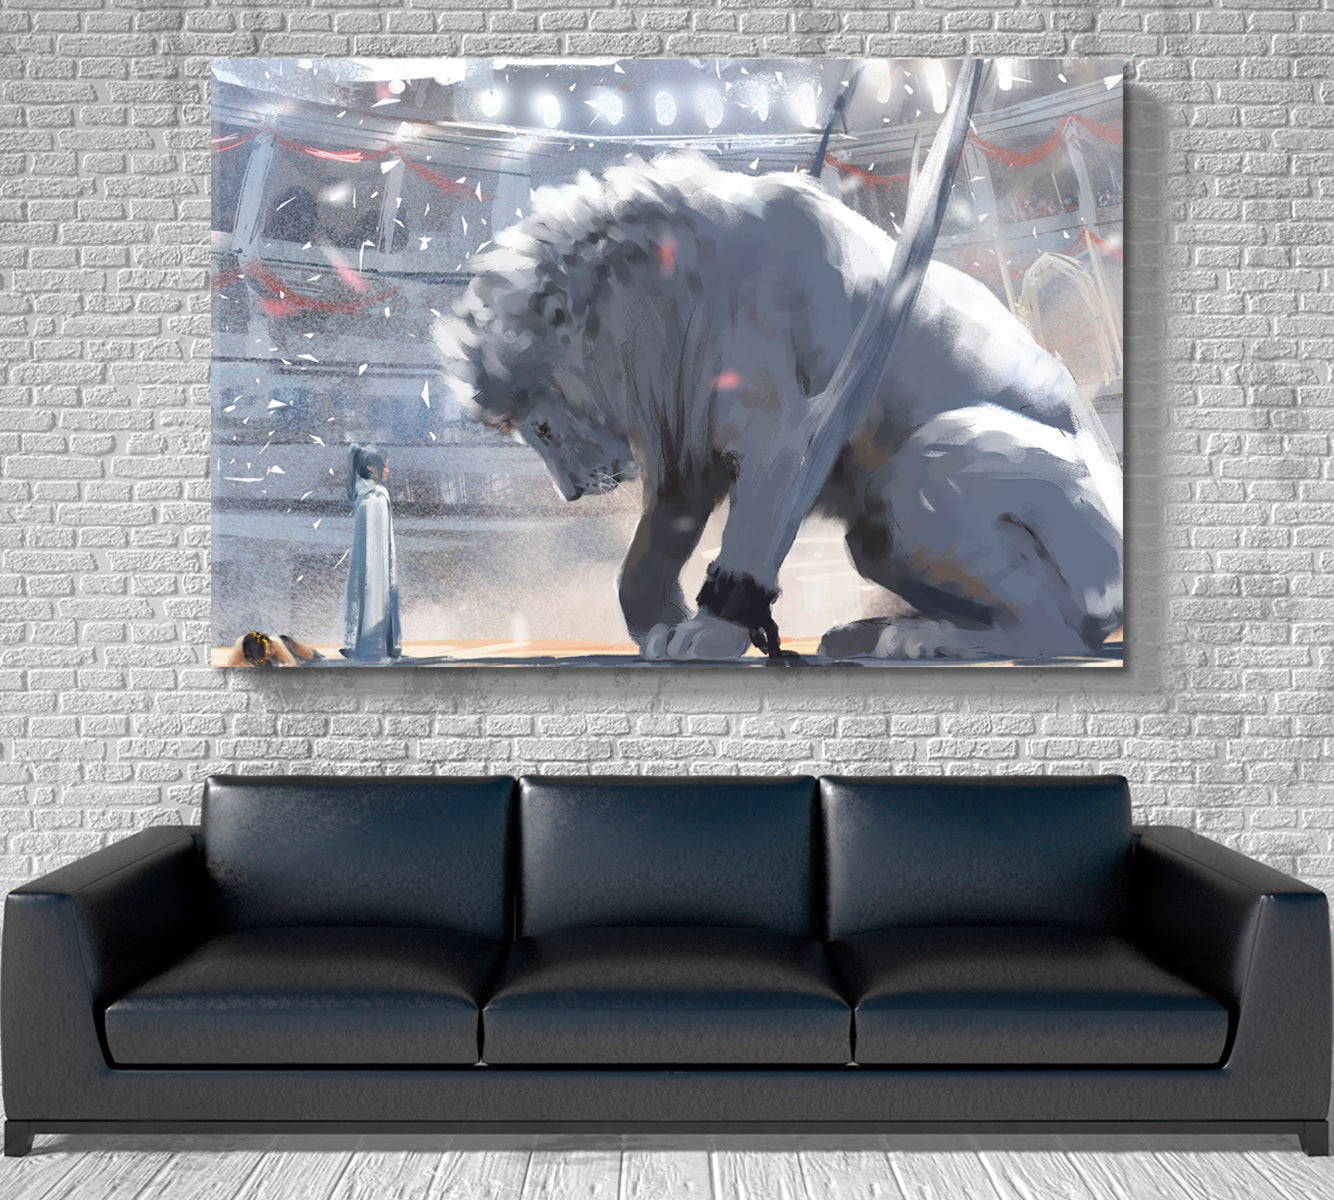 Mia And The White Lion Surreal Fantasy Large Art Print Décor Artesty 1 panel 24" x 16" 